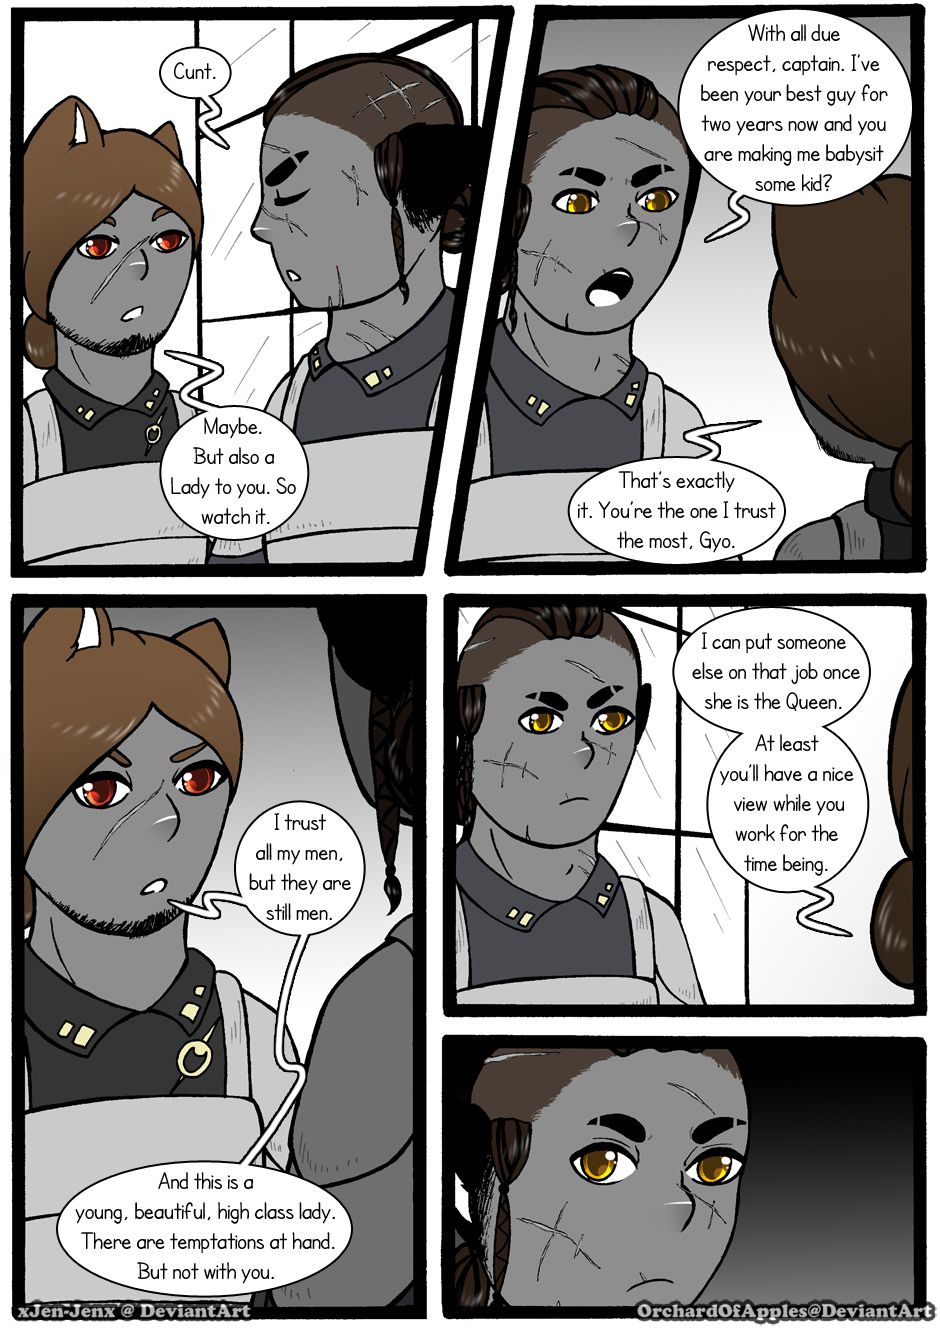 [Jeny-jen94] Between Kings and Queens [Ongoing] 287